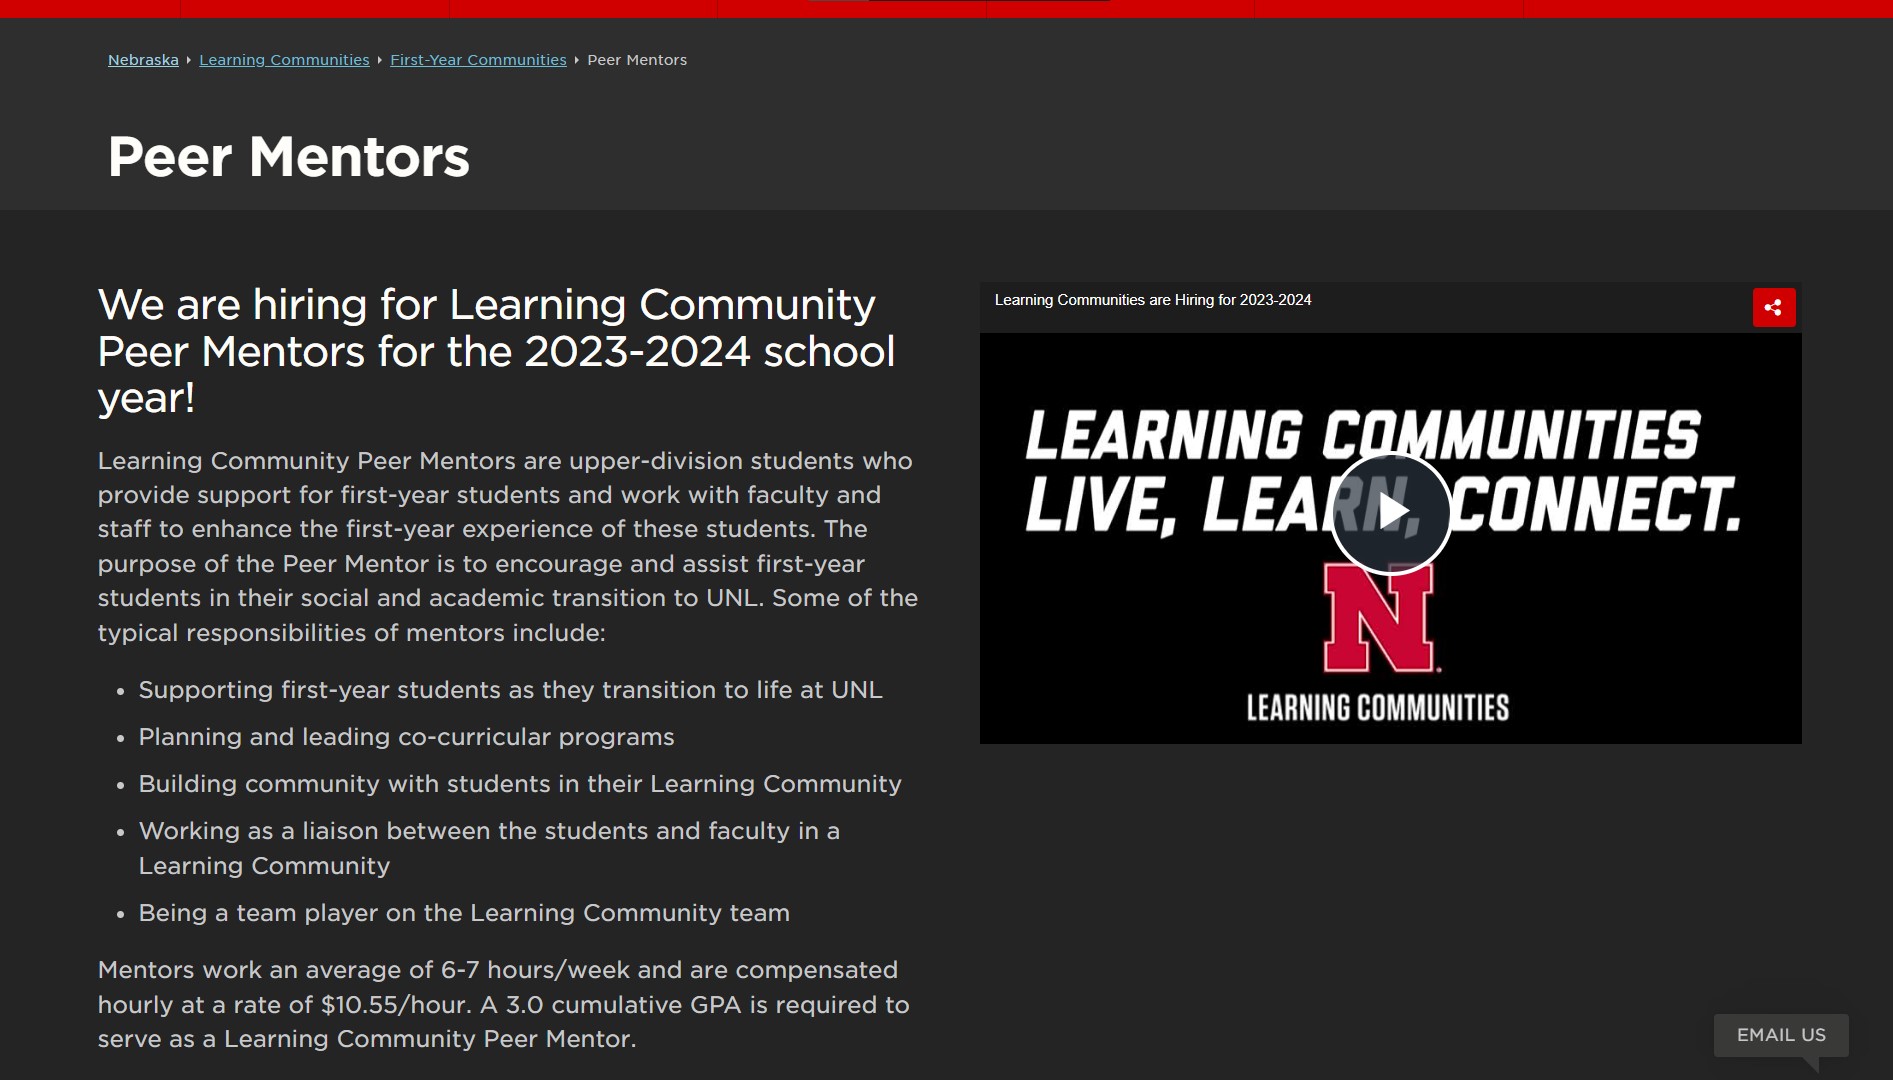 Learning Communities are Hiring for the 2023-2024 School Year